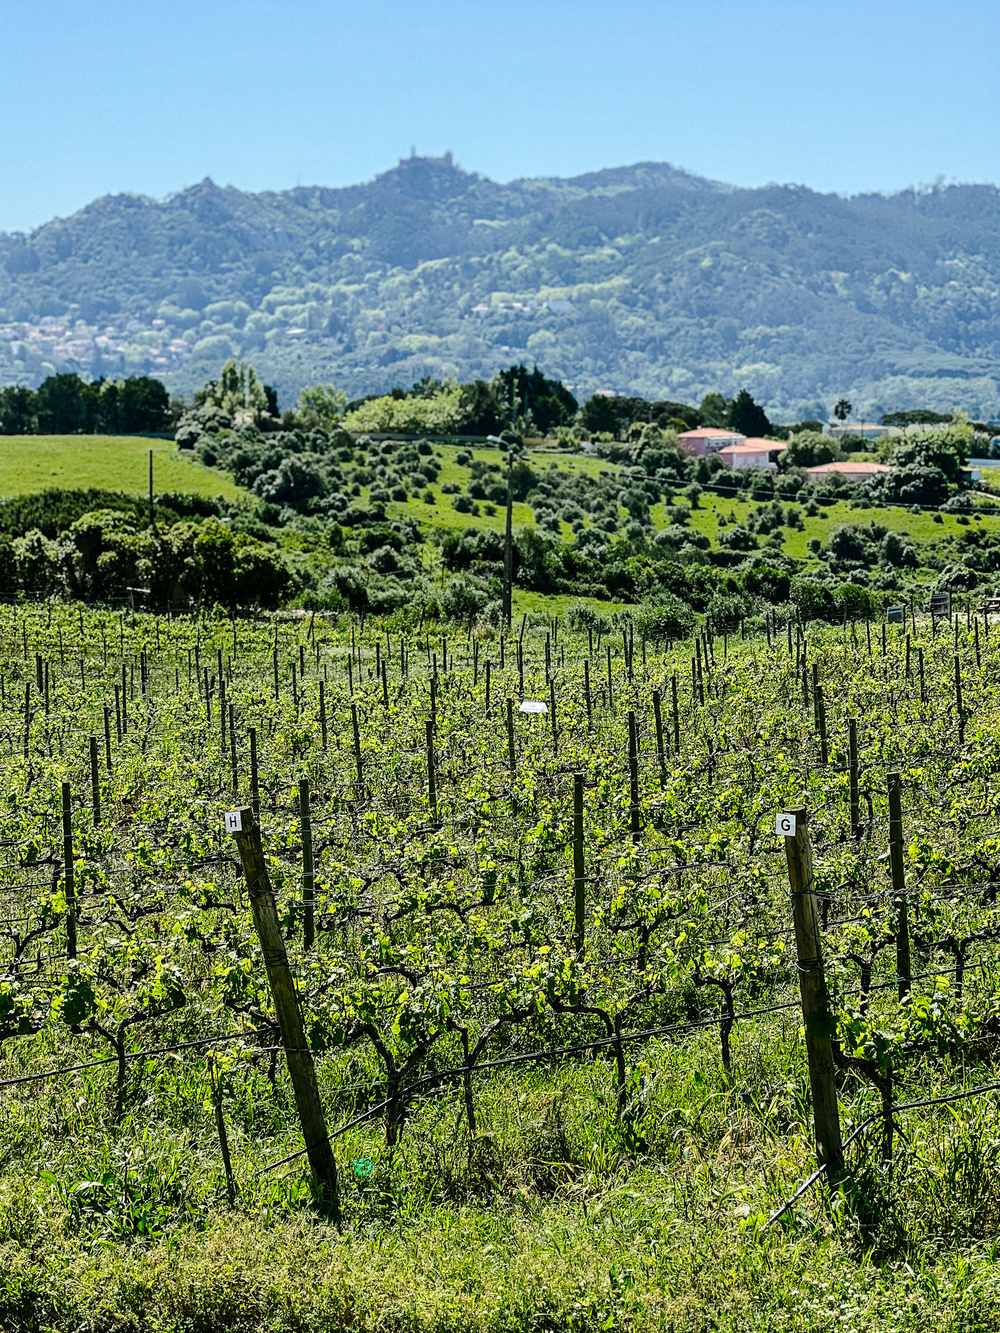 A vineyard with young grapevines in the foreground, a house amid lush greenery in the midground, and a mountain range with a structure on the summit in the background on a clear day.